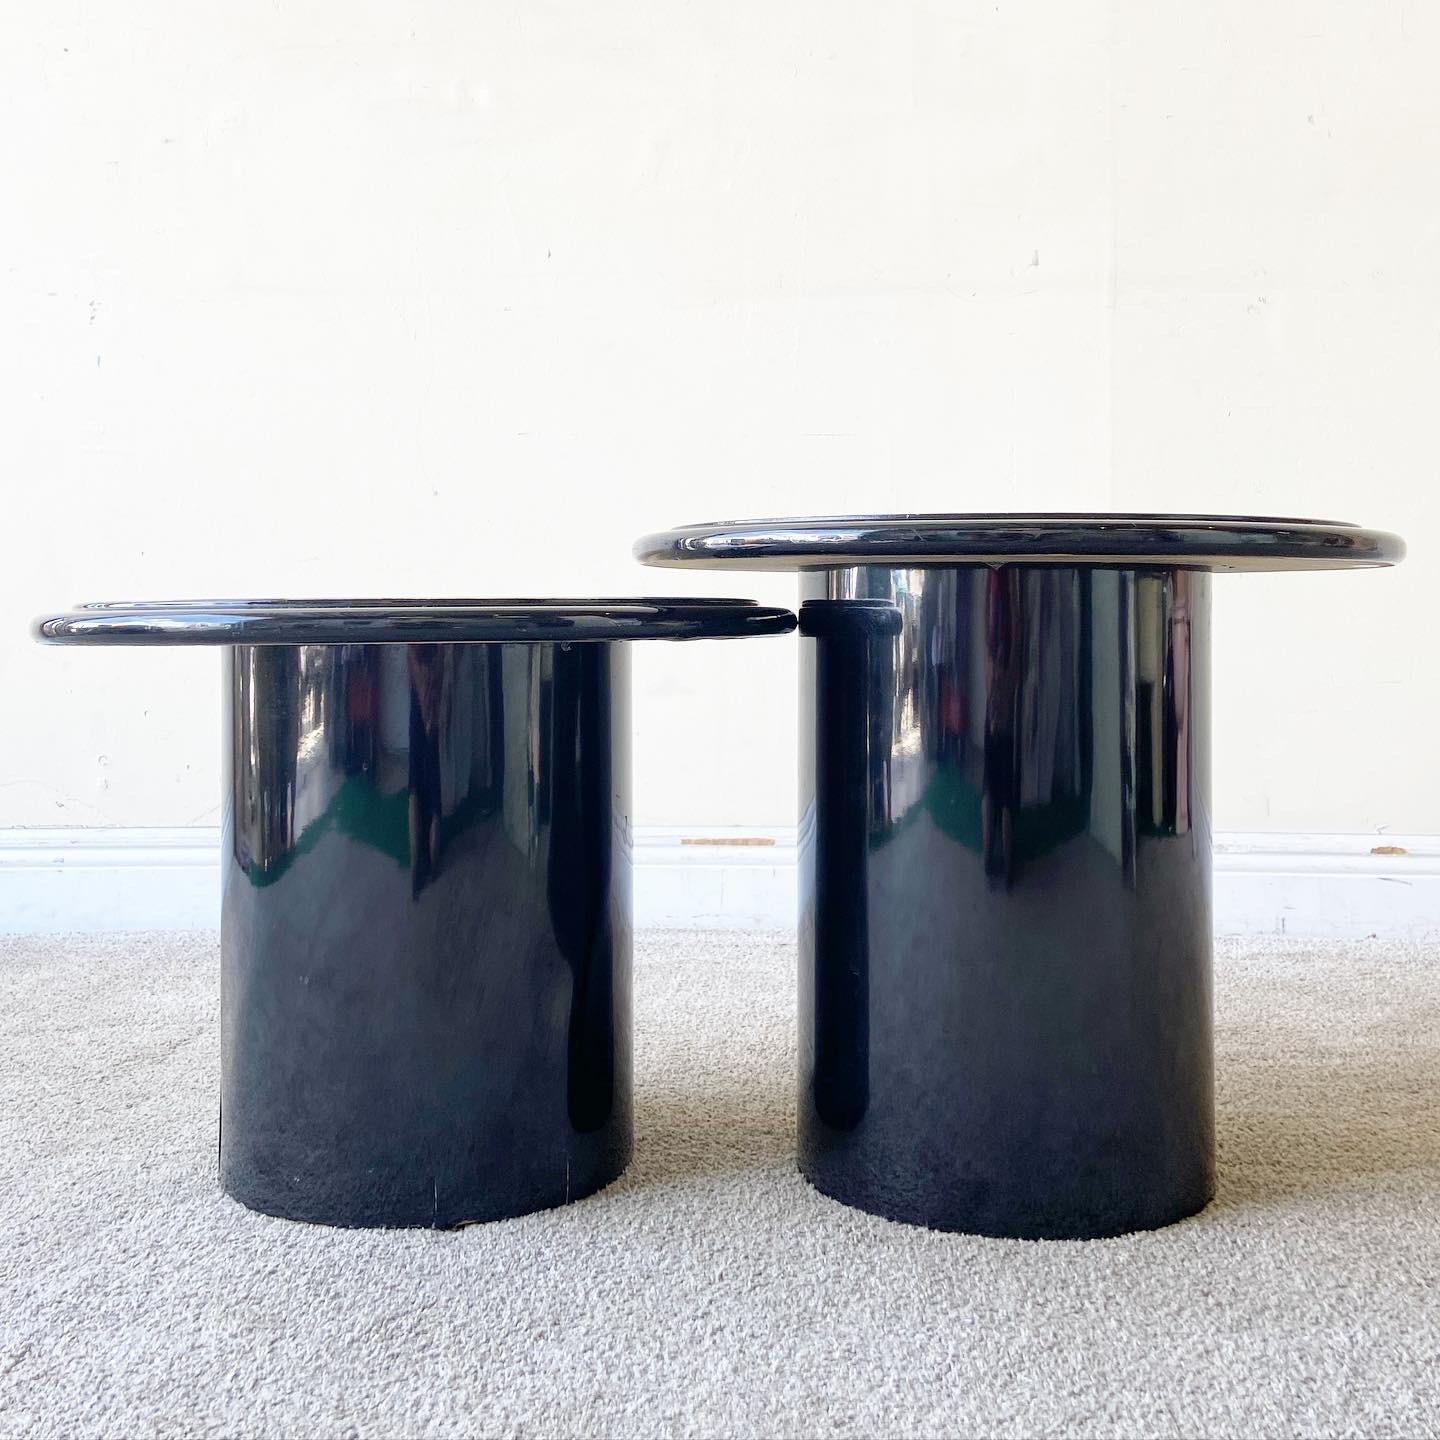 Incredible pair of postmodern/deco mushroom side tables. Each feature a black lacquered body with an abstract colorful design on the epoxy top.

Small one:
20w x 20d x 15h